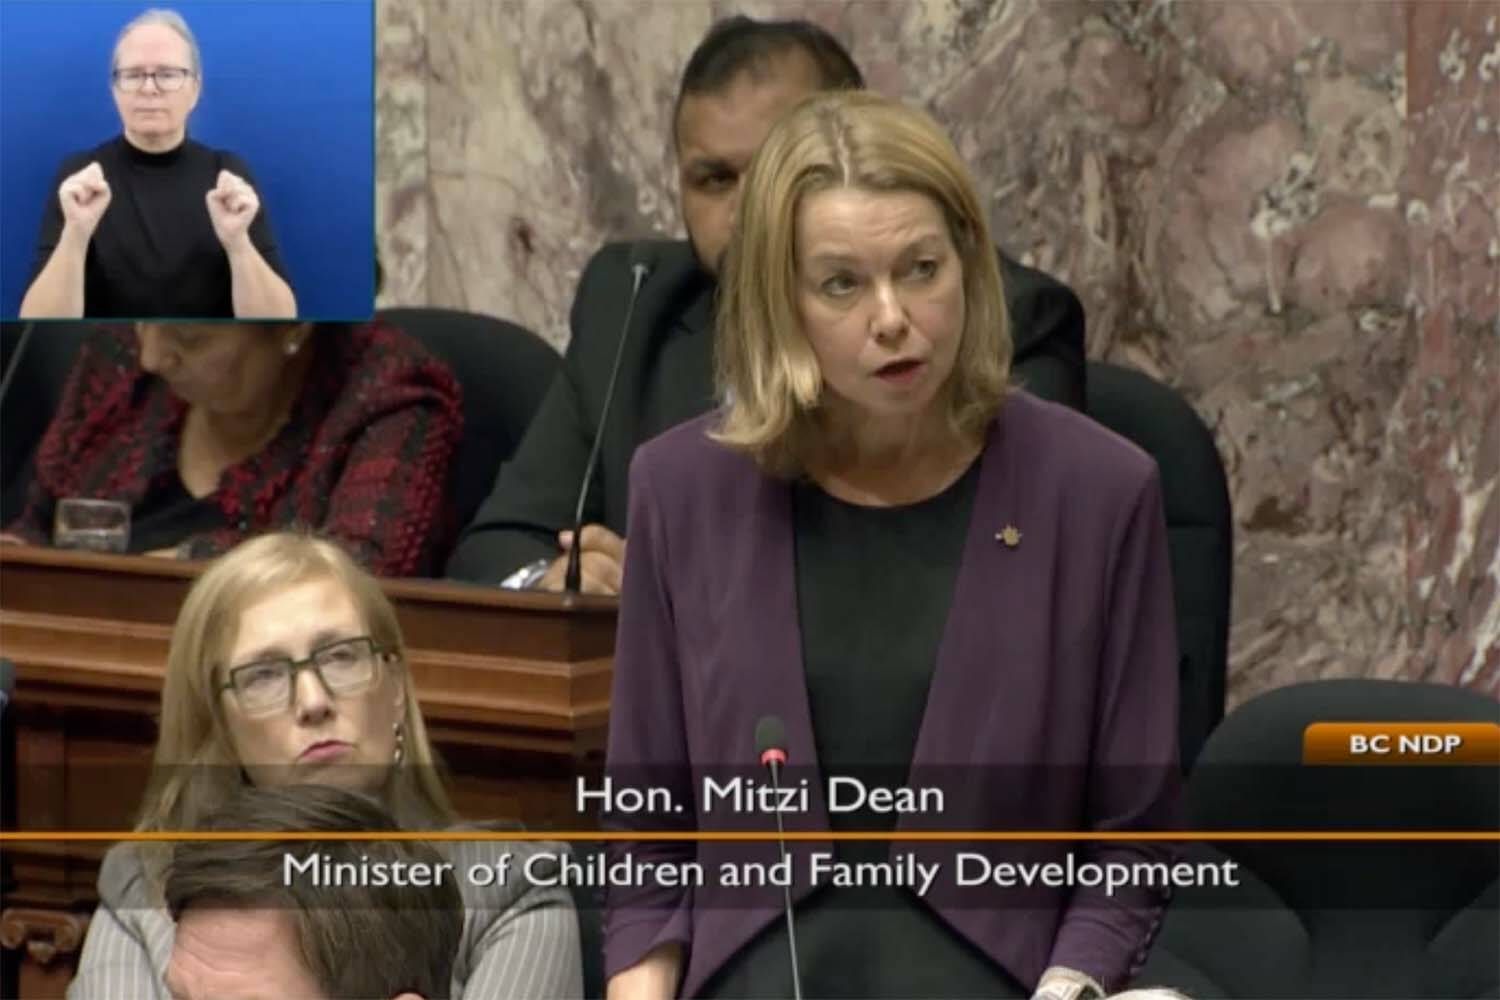 Mitzi Dean will no longer serve as Child and Family Development Minister following a cabinet shuffle announced Monday morning. Fellow Victoria MLA Grace Lore will take Dean’s job, while Dean will take over Lore’s old job as minister of state for child care. Andrew Mercier remains in cabinet but with the new title of minister of state for sustainable forestry while George Chow joins cabinet as parliamentary secretary for international credentials. (Screecap)